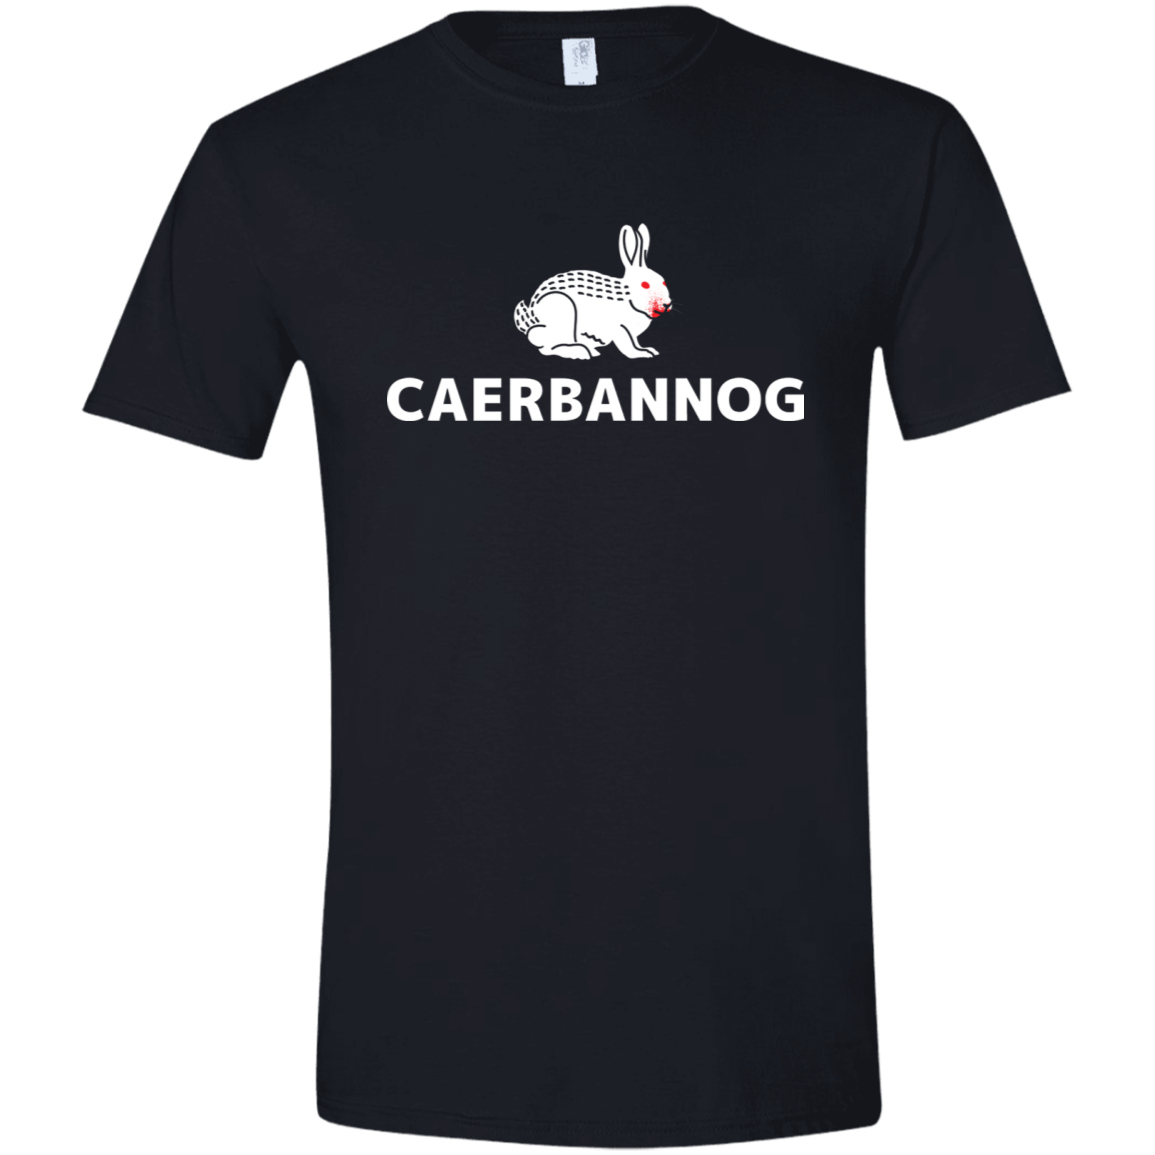 T-Shirts Black / X-Small Caerbannog Men's Semi-Fitted Softstyle